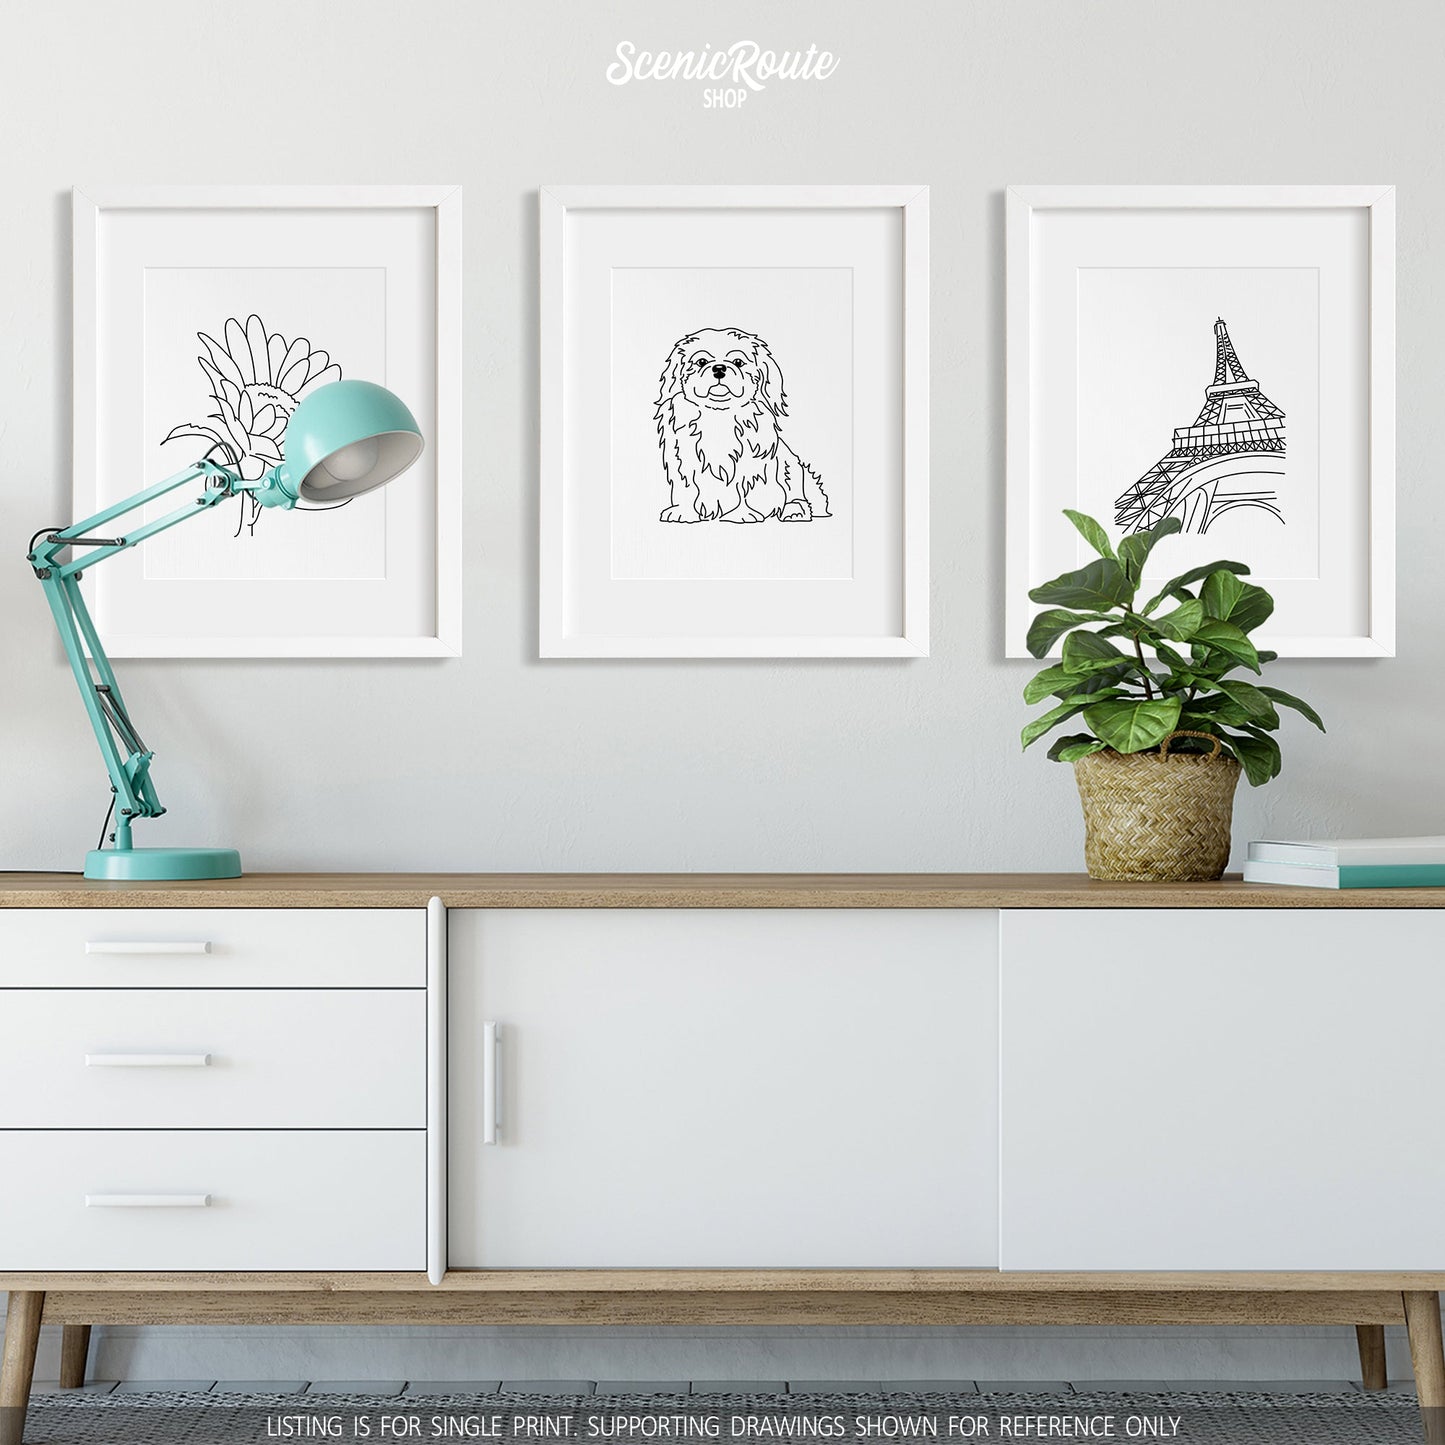 A group of three framed drawings on a white wall above a credenza with a lamp and plant. The line art drawings include a Sunflower, a Pekingese dog, and the Eiffel Tower